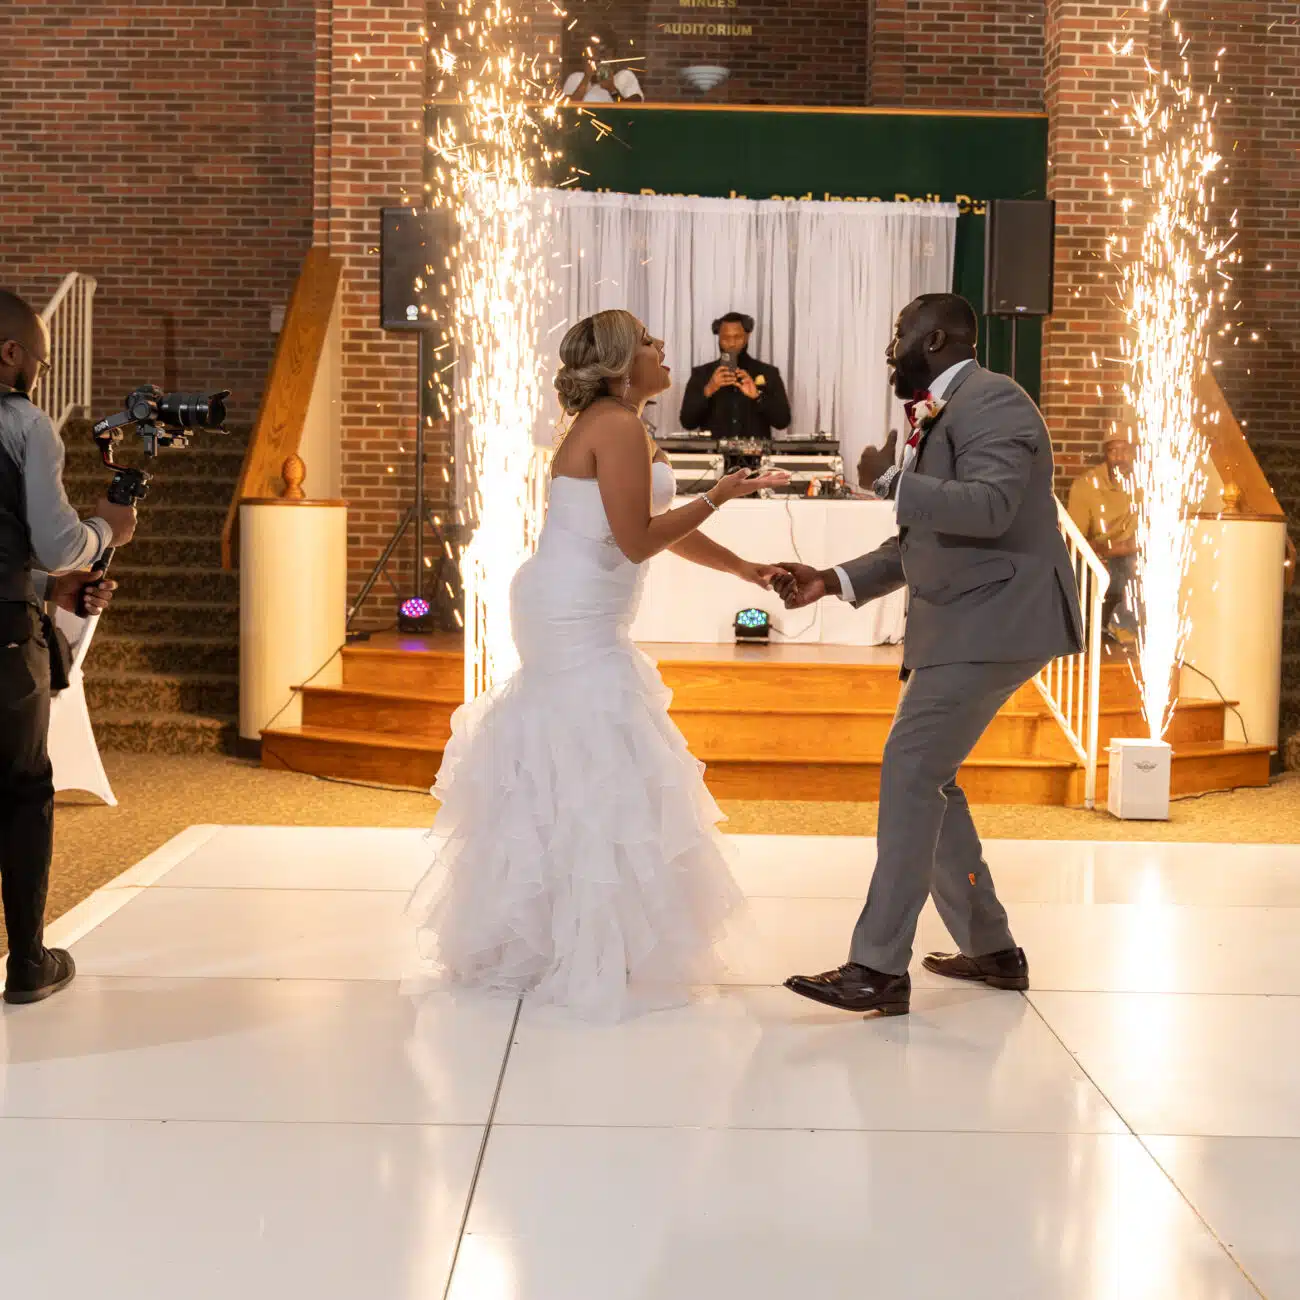 Dontavious Chesson of True Essence Photography, using a ronin rs3 pro to capture the bride's and groom's first wedding dance and celebration. Located in raleigh, nc wedding venue. Sparks flying in the background for the first dance.